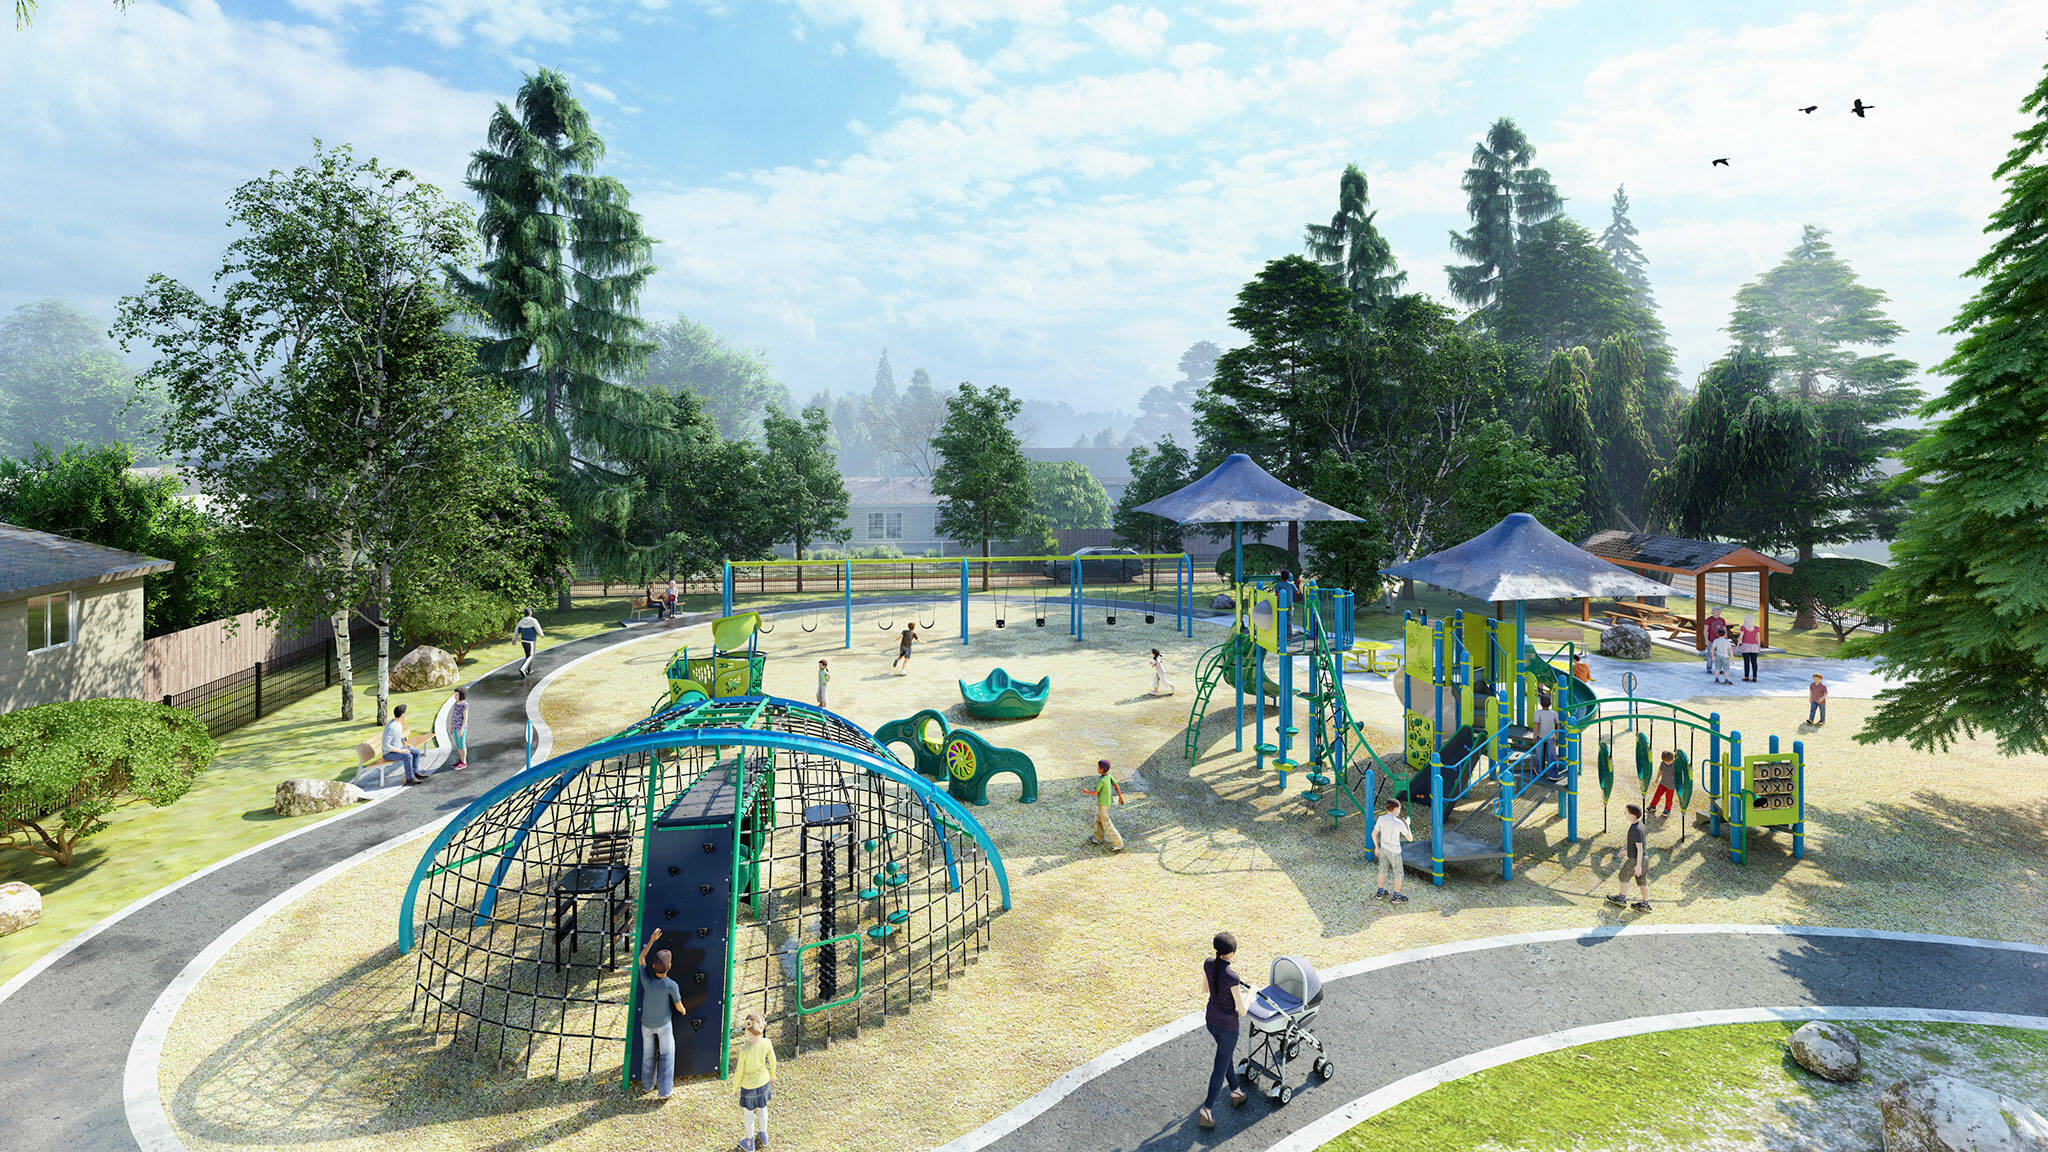 City of Sequim
A possible redesign for new playground equipment in Margaret Kirner Park could incorporate more ladders and slides called “Chutes and Ladders.” Voters in a community survey preferred this option for the park.